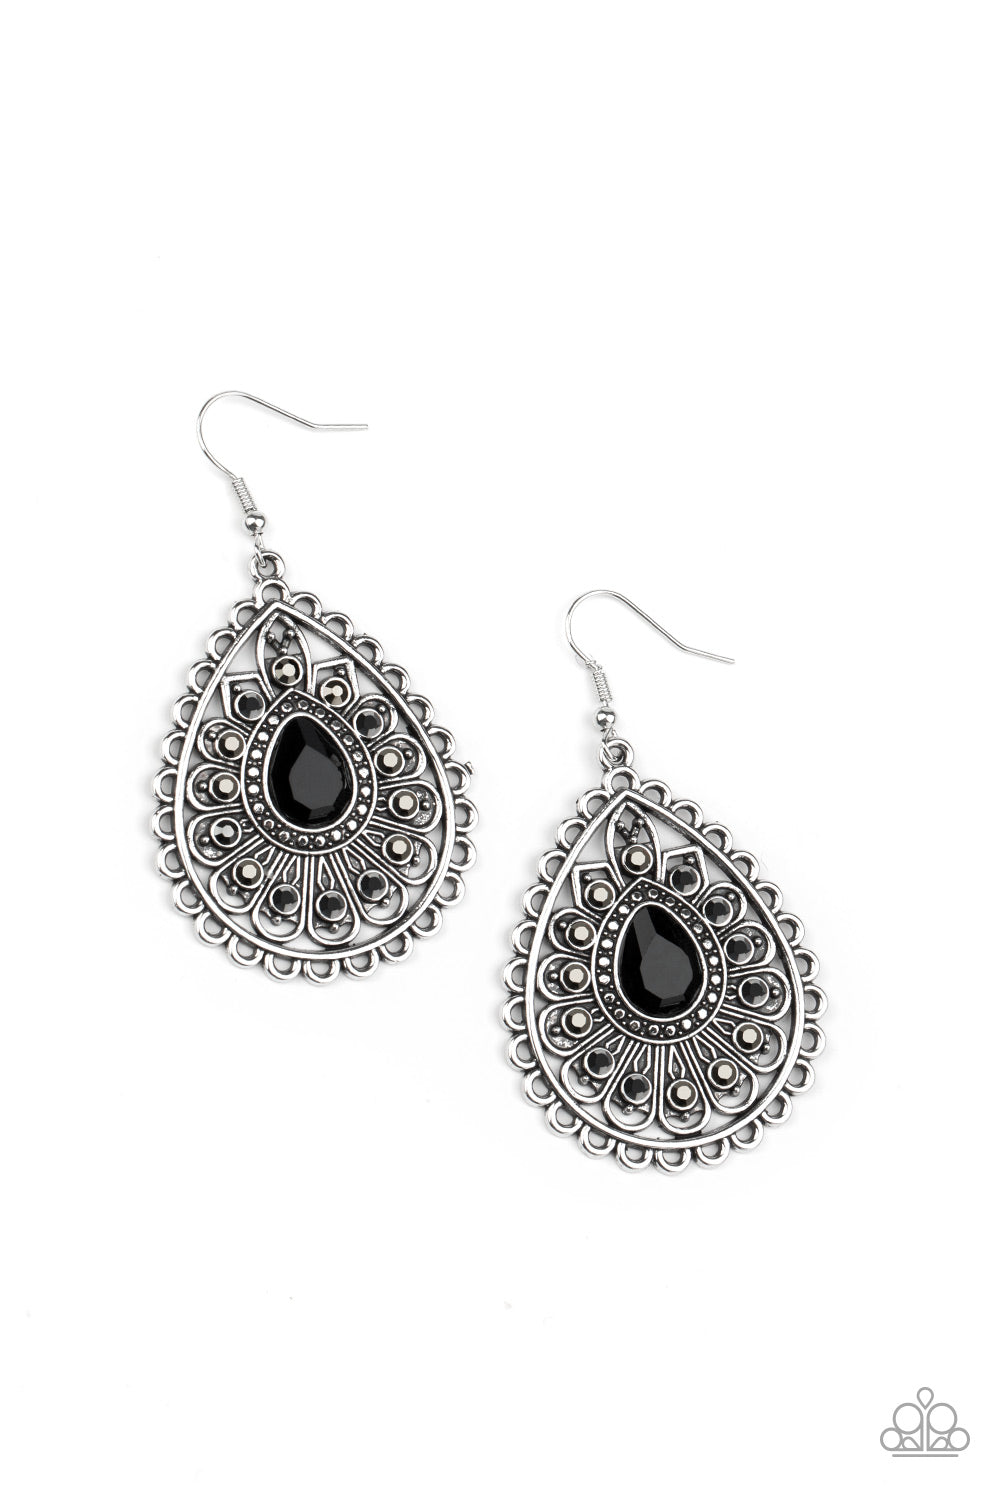 Eat Drink and BEAM Merry - black - Paparazzi earrings